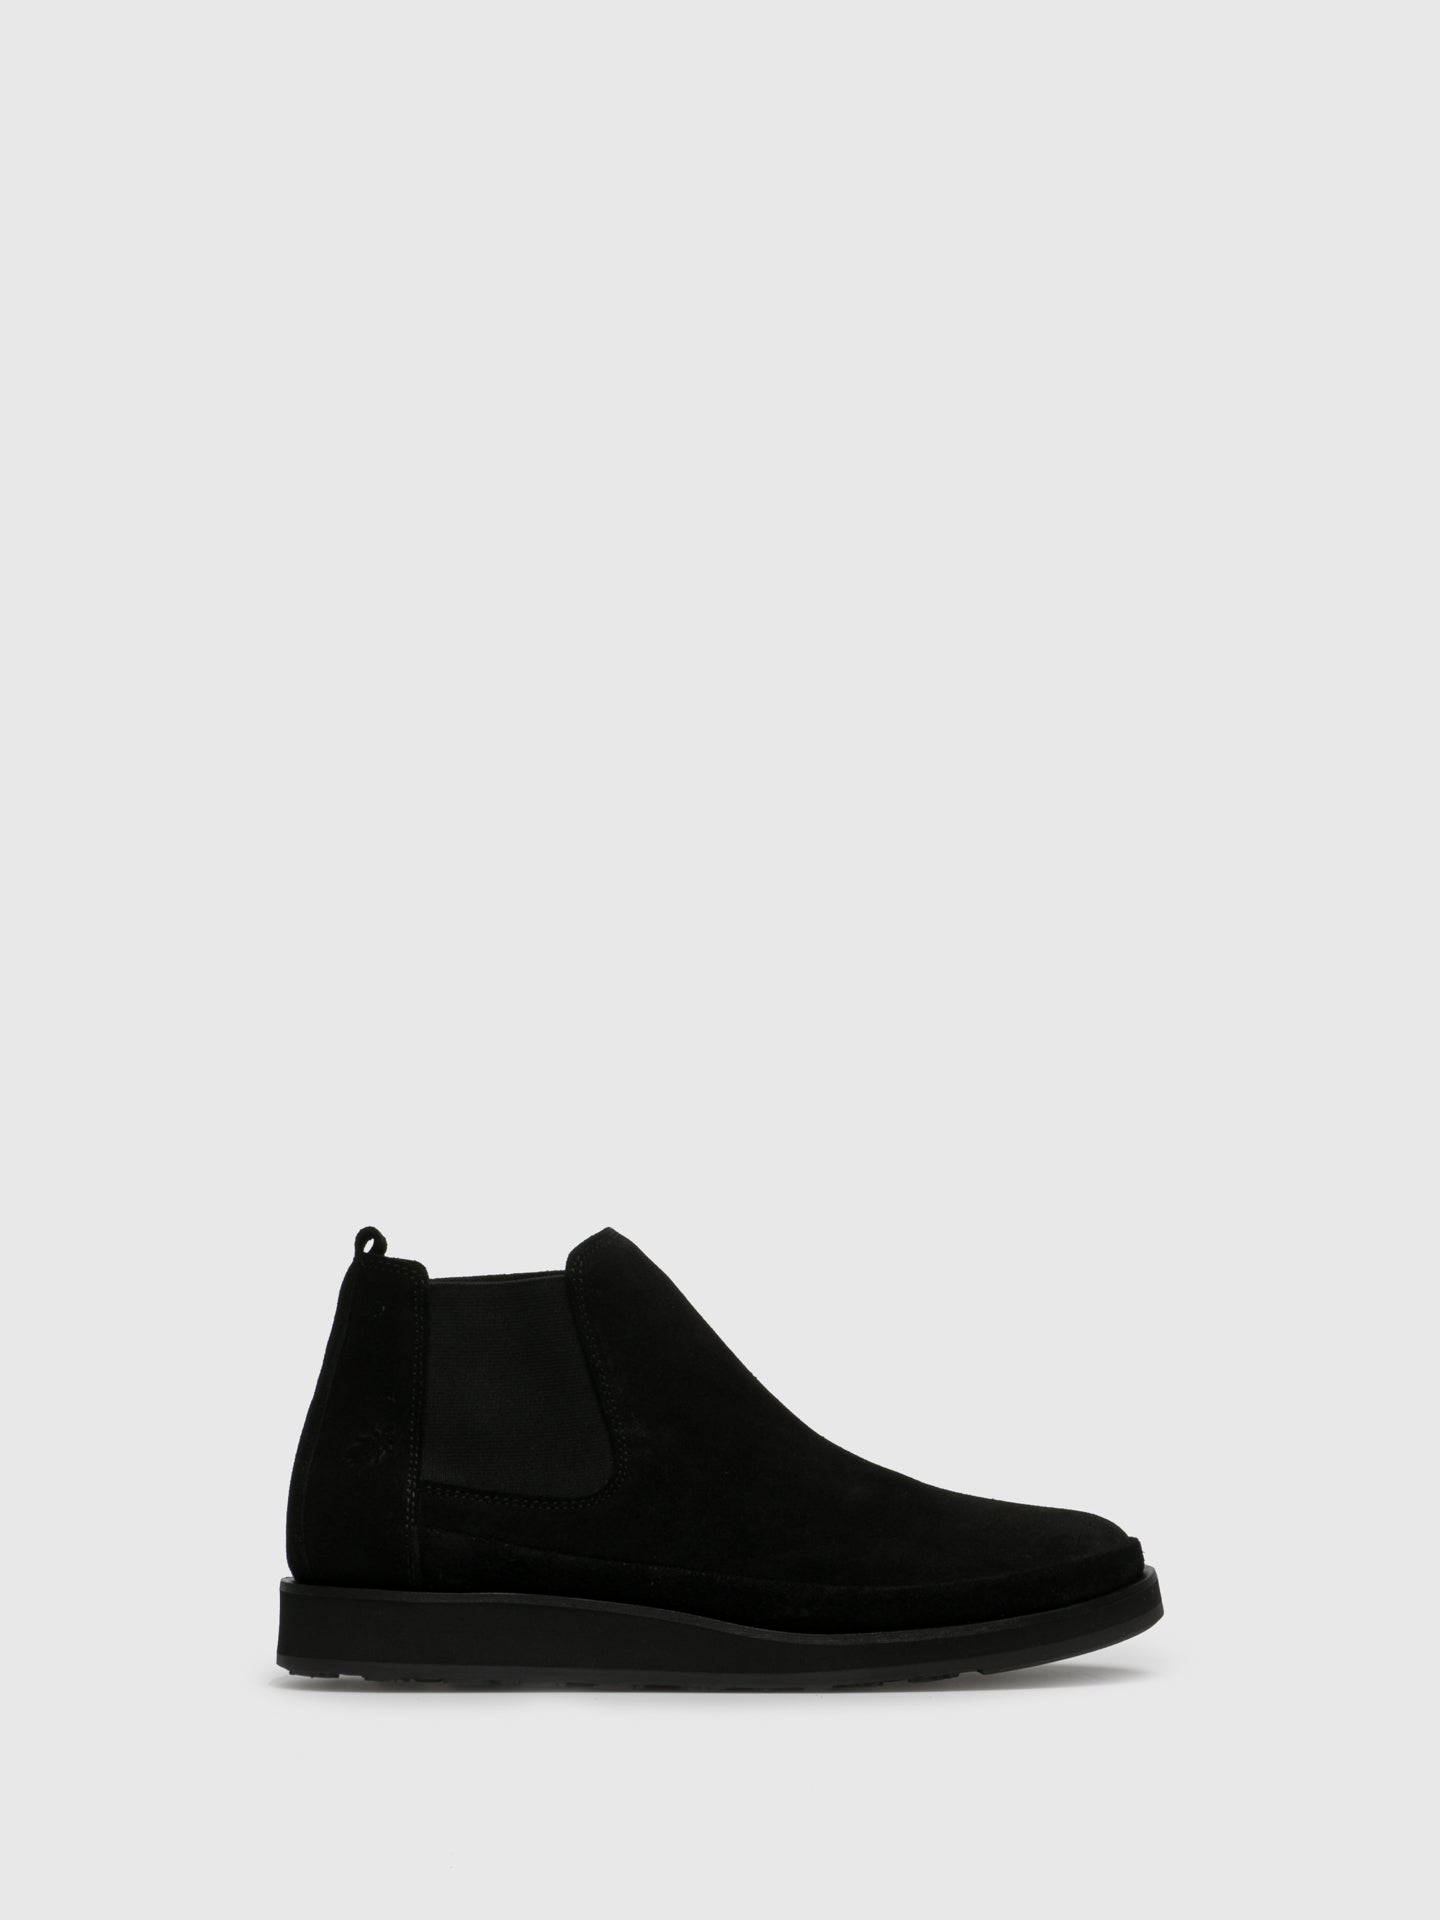 Fly London Black Leather Chelsea Ankle Boots